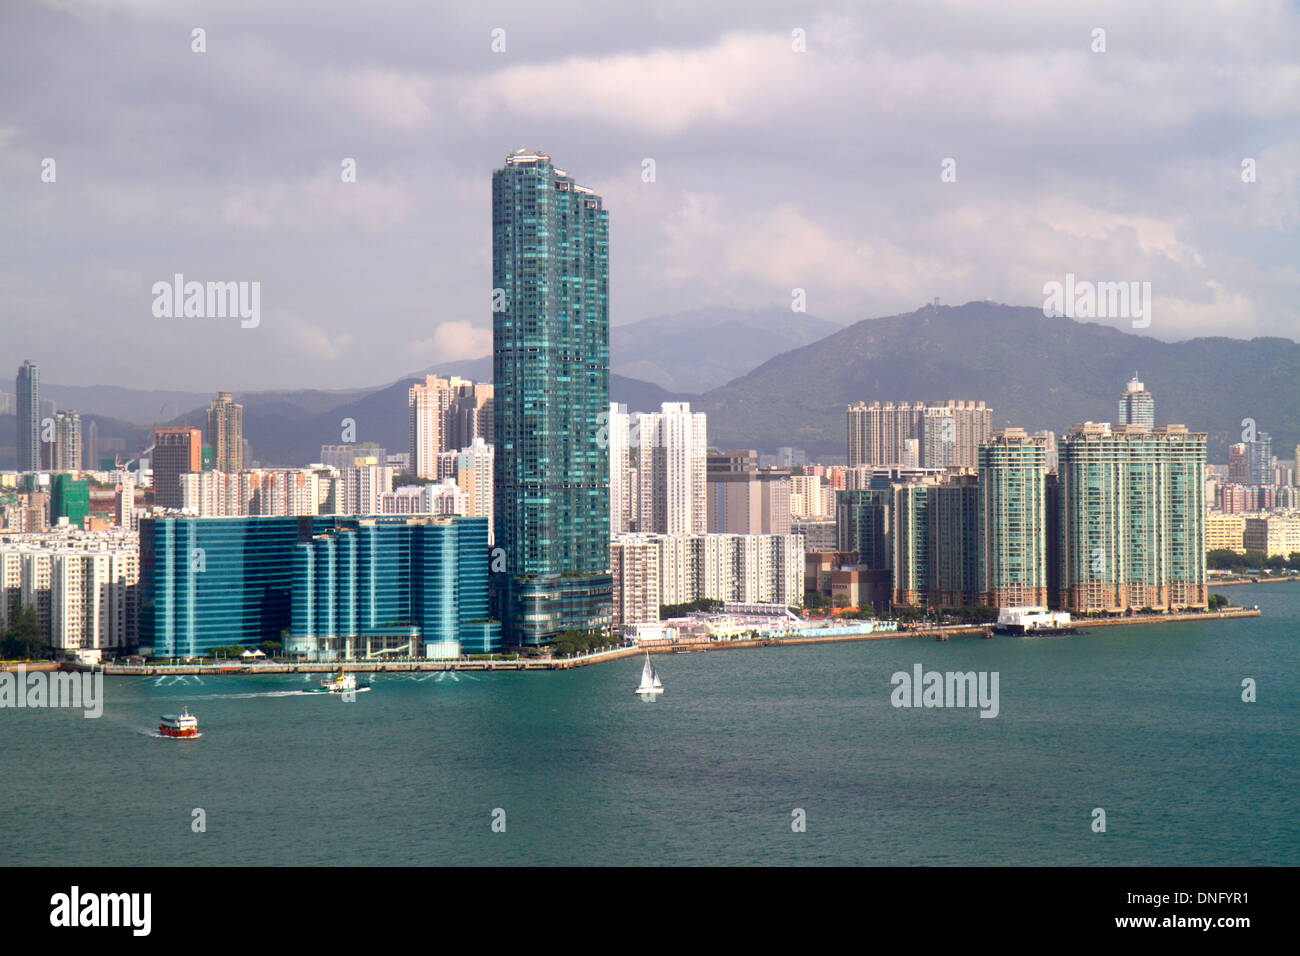 Hong Kong Chine,HK,Asie,chinois,oriental,île,Victoria Harbour,Kowloon Bay,vue de North point,Kowloon,Harbourfront Landmark Tower 1 2,City skylin Banque D'Images